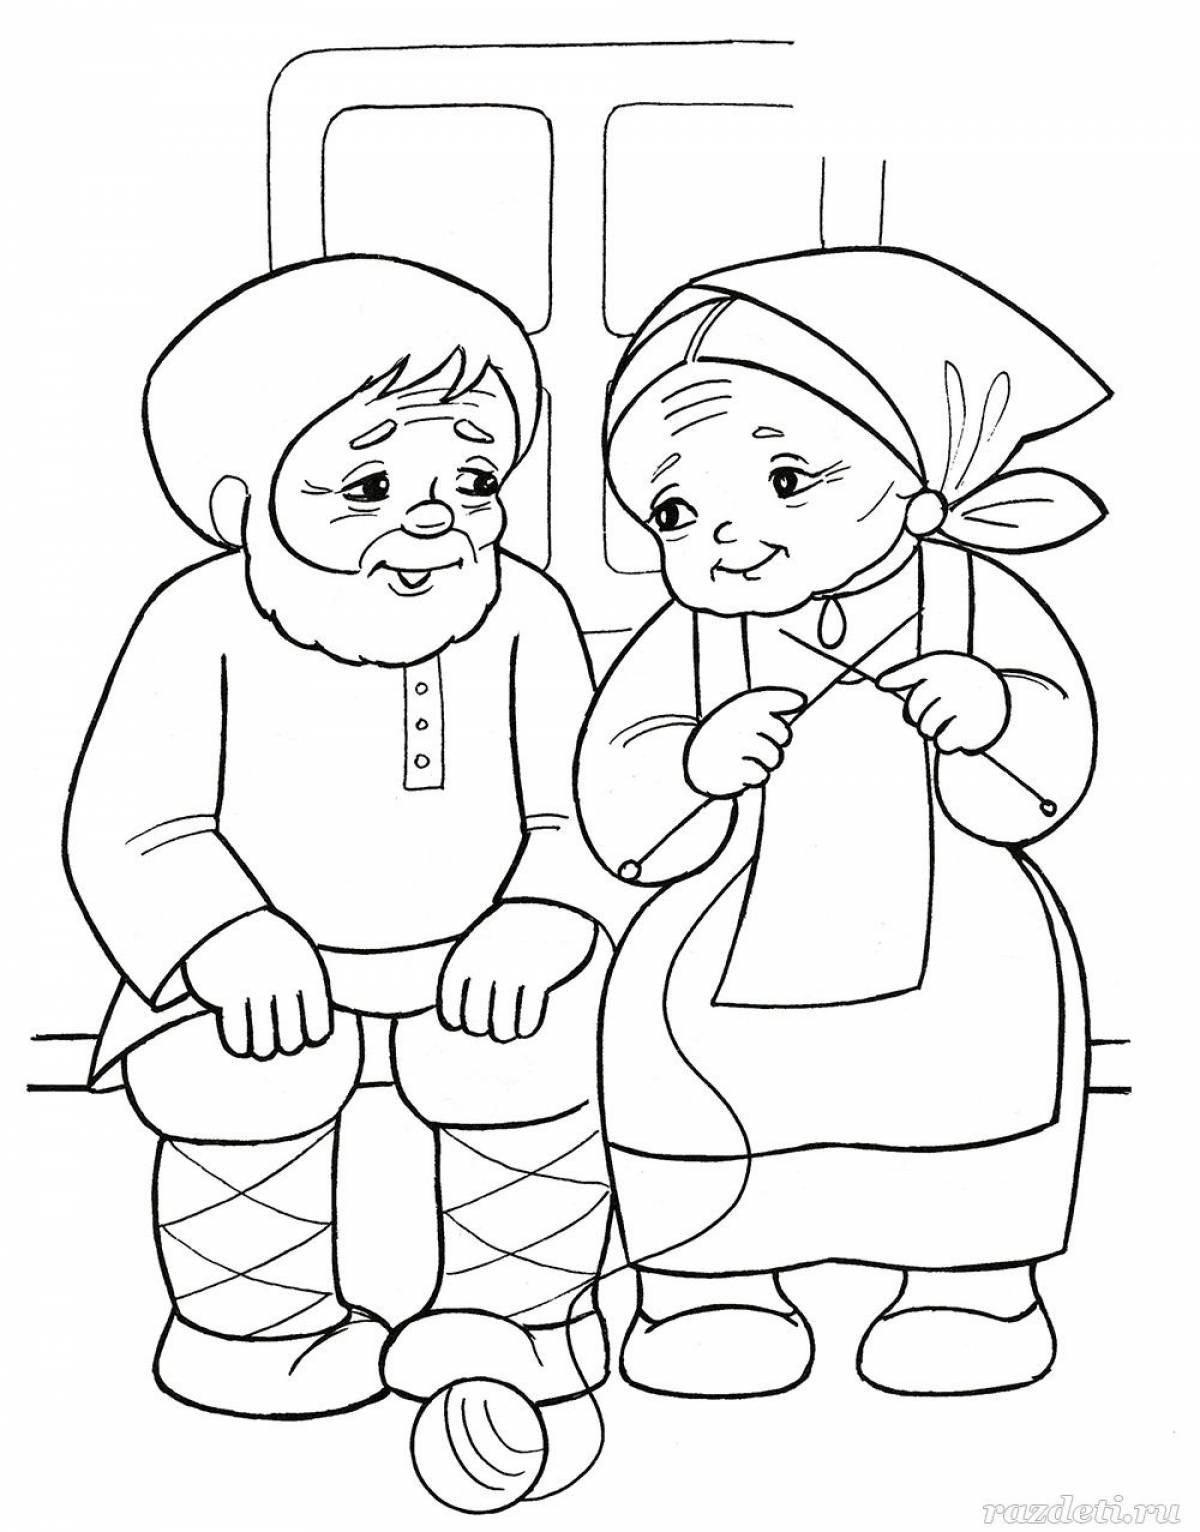 Gorgeous grandfather coloring pages for kids